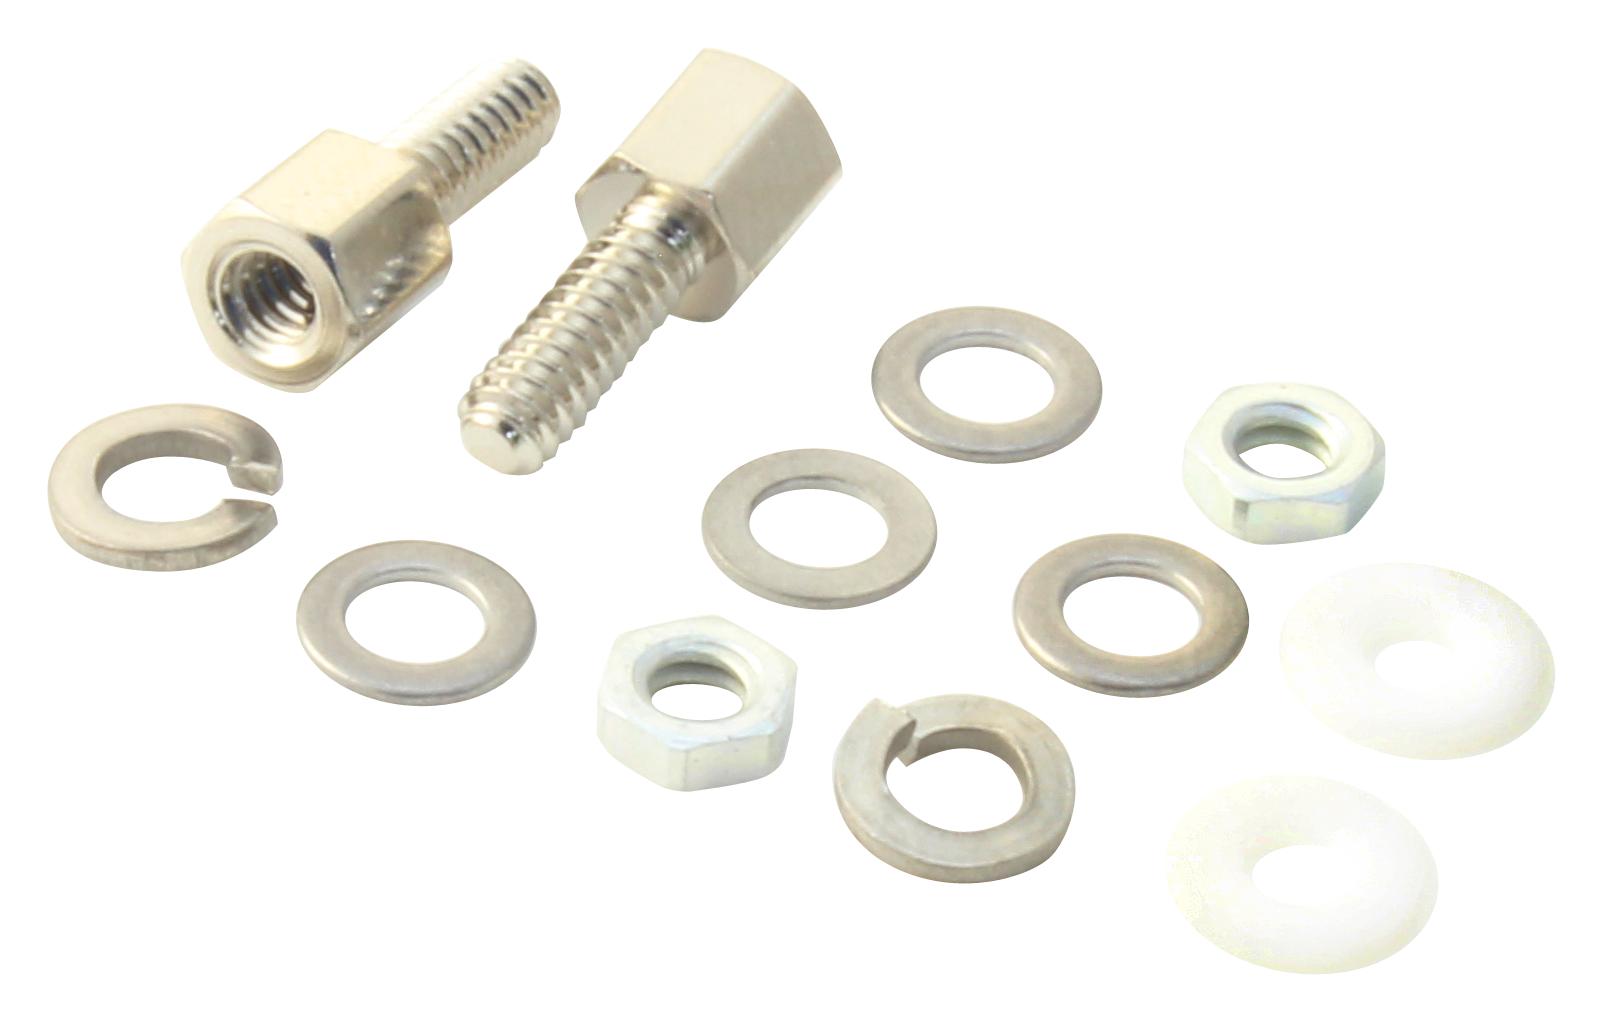 160-067-020R033 KIT, FACE MOUNTING, 4-40UNC NORCOMP